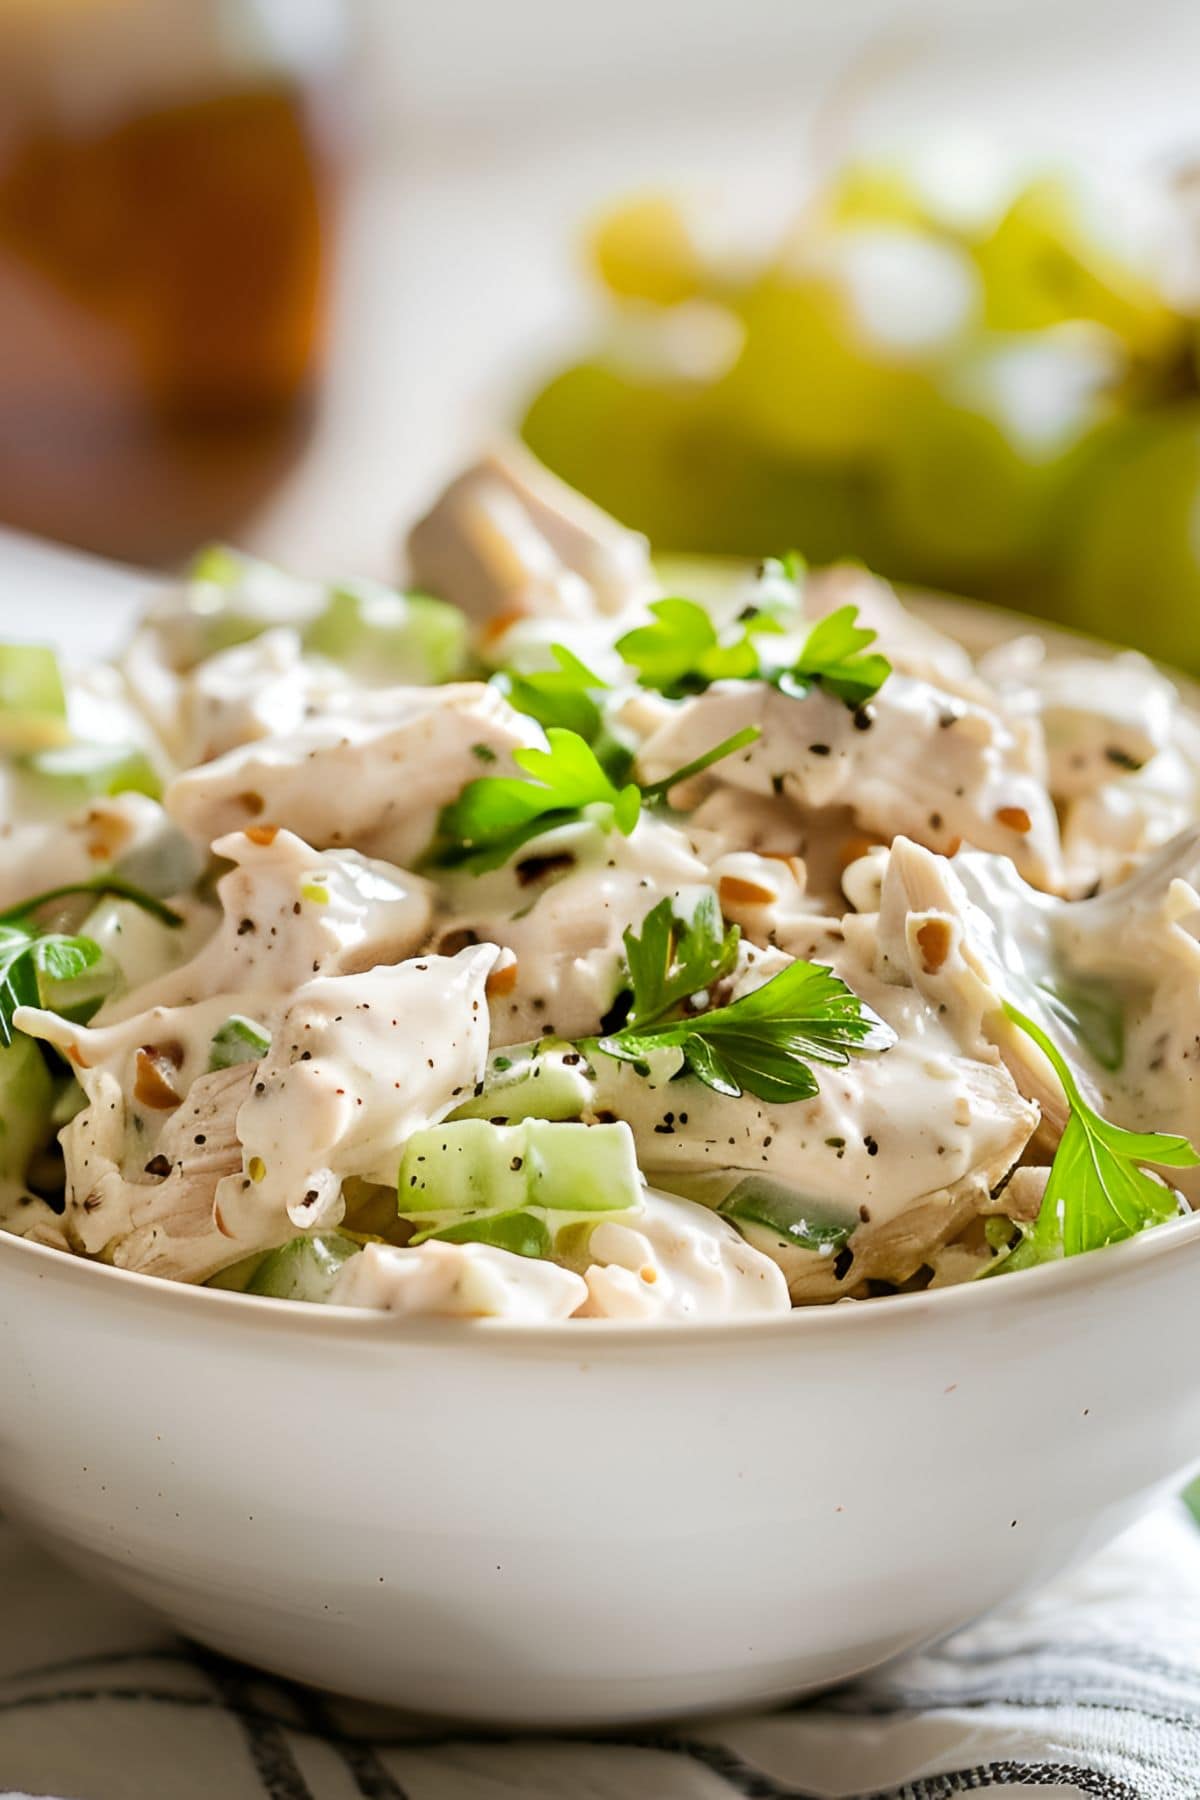 Super Close Up of Ina Garten's Chicken Salad in a Bowl with Herbs, Seasonings, and Lots of Sauce